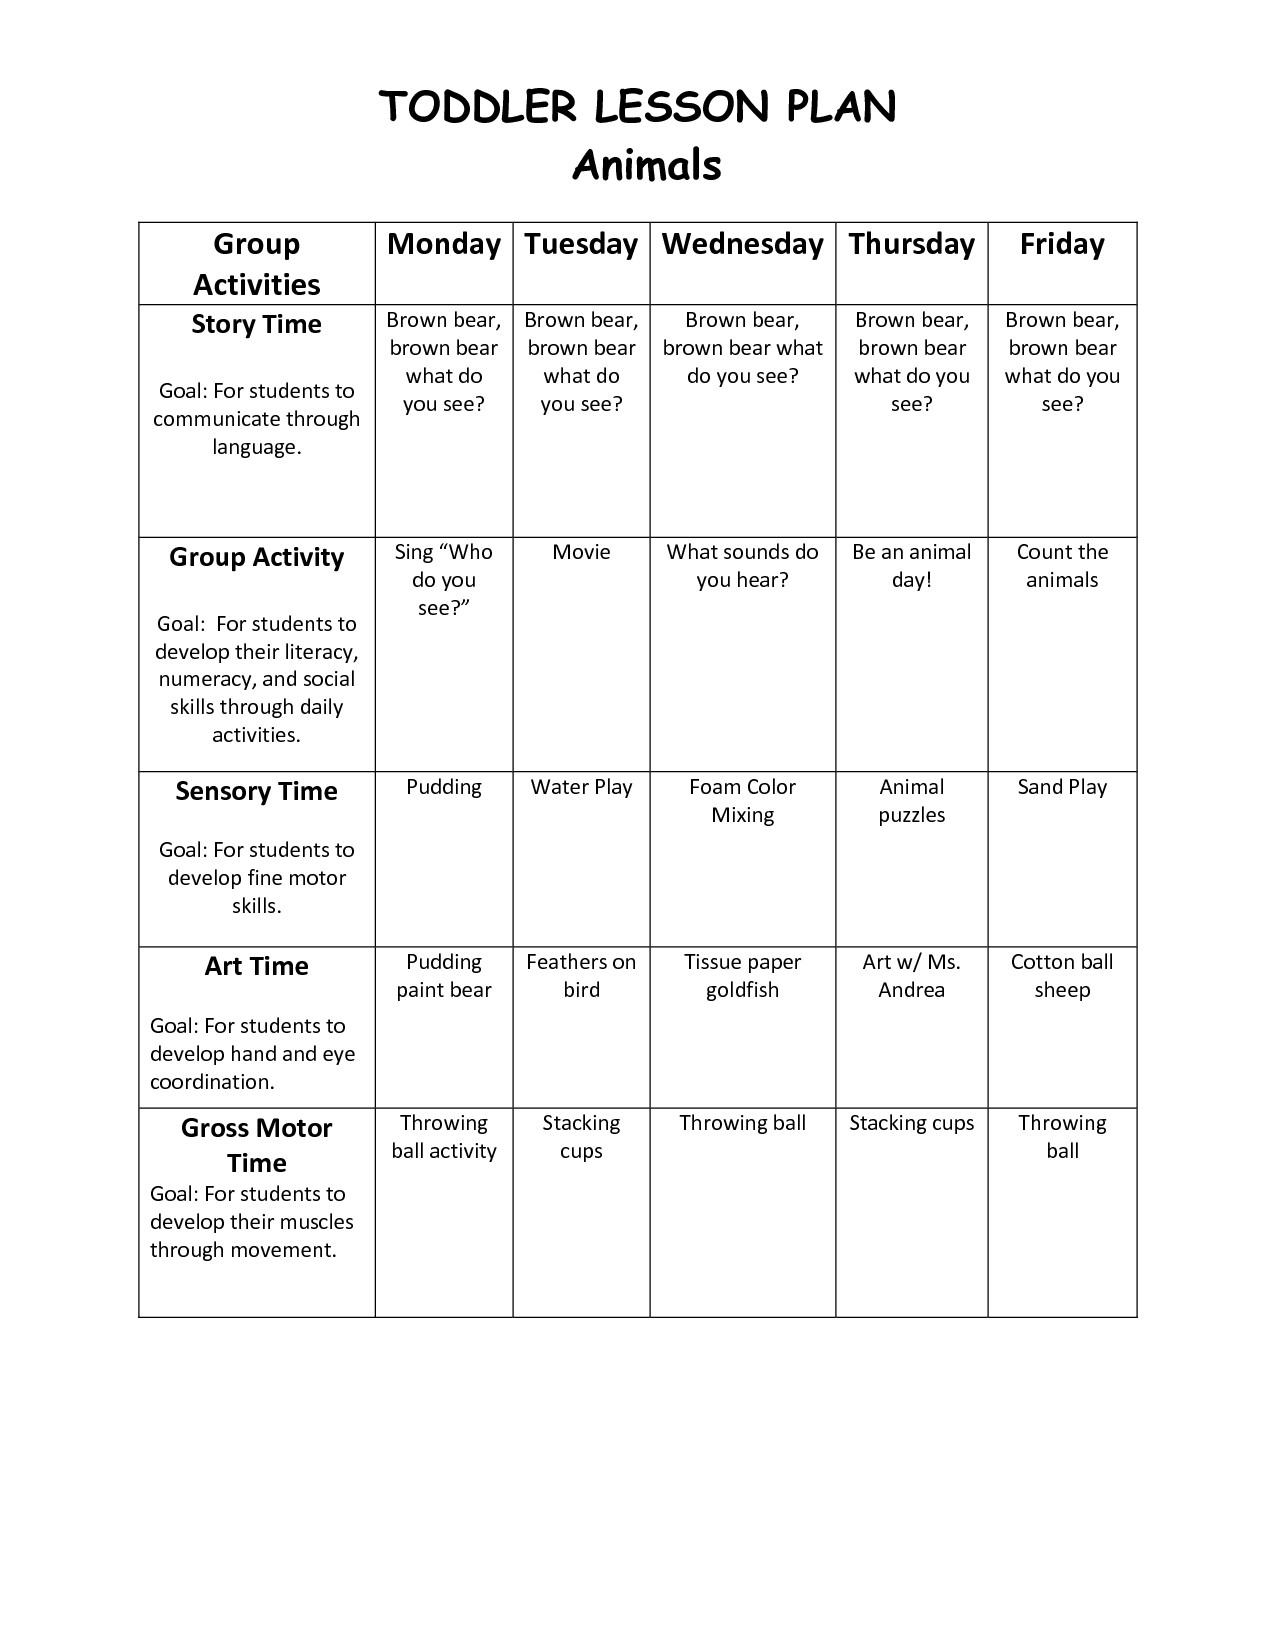 Daycare Lesson Plans Daycare Weekly Lesson Plan Template